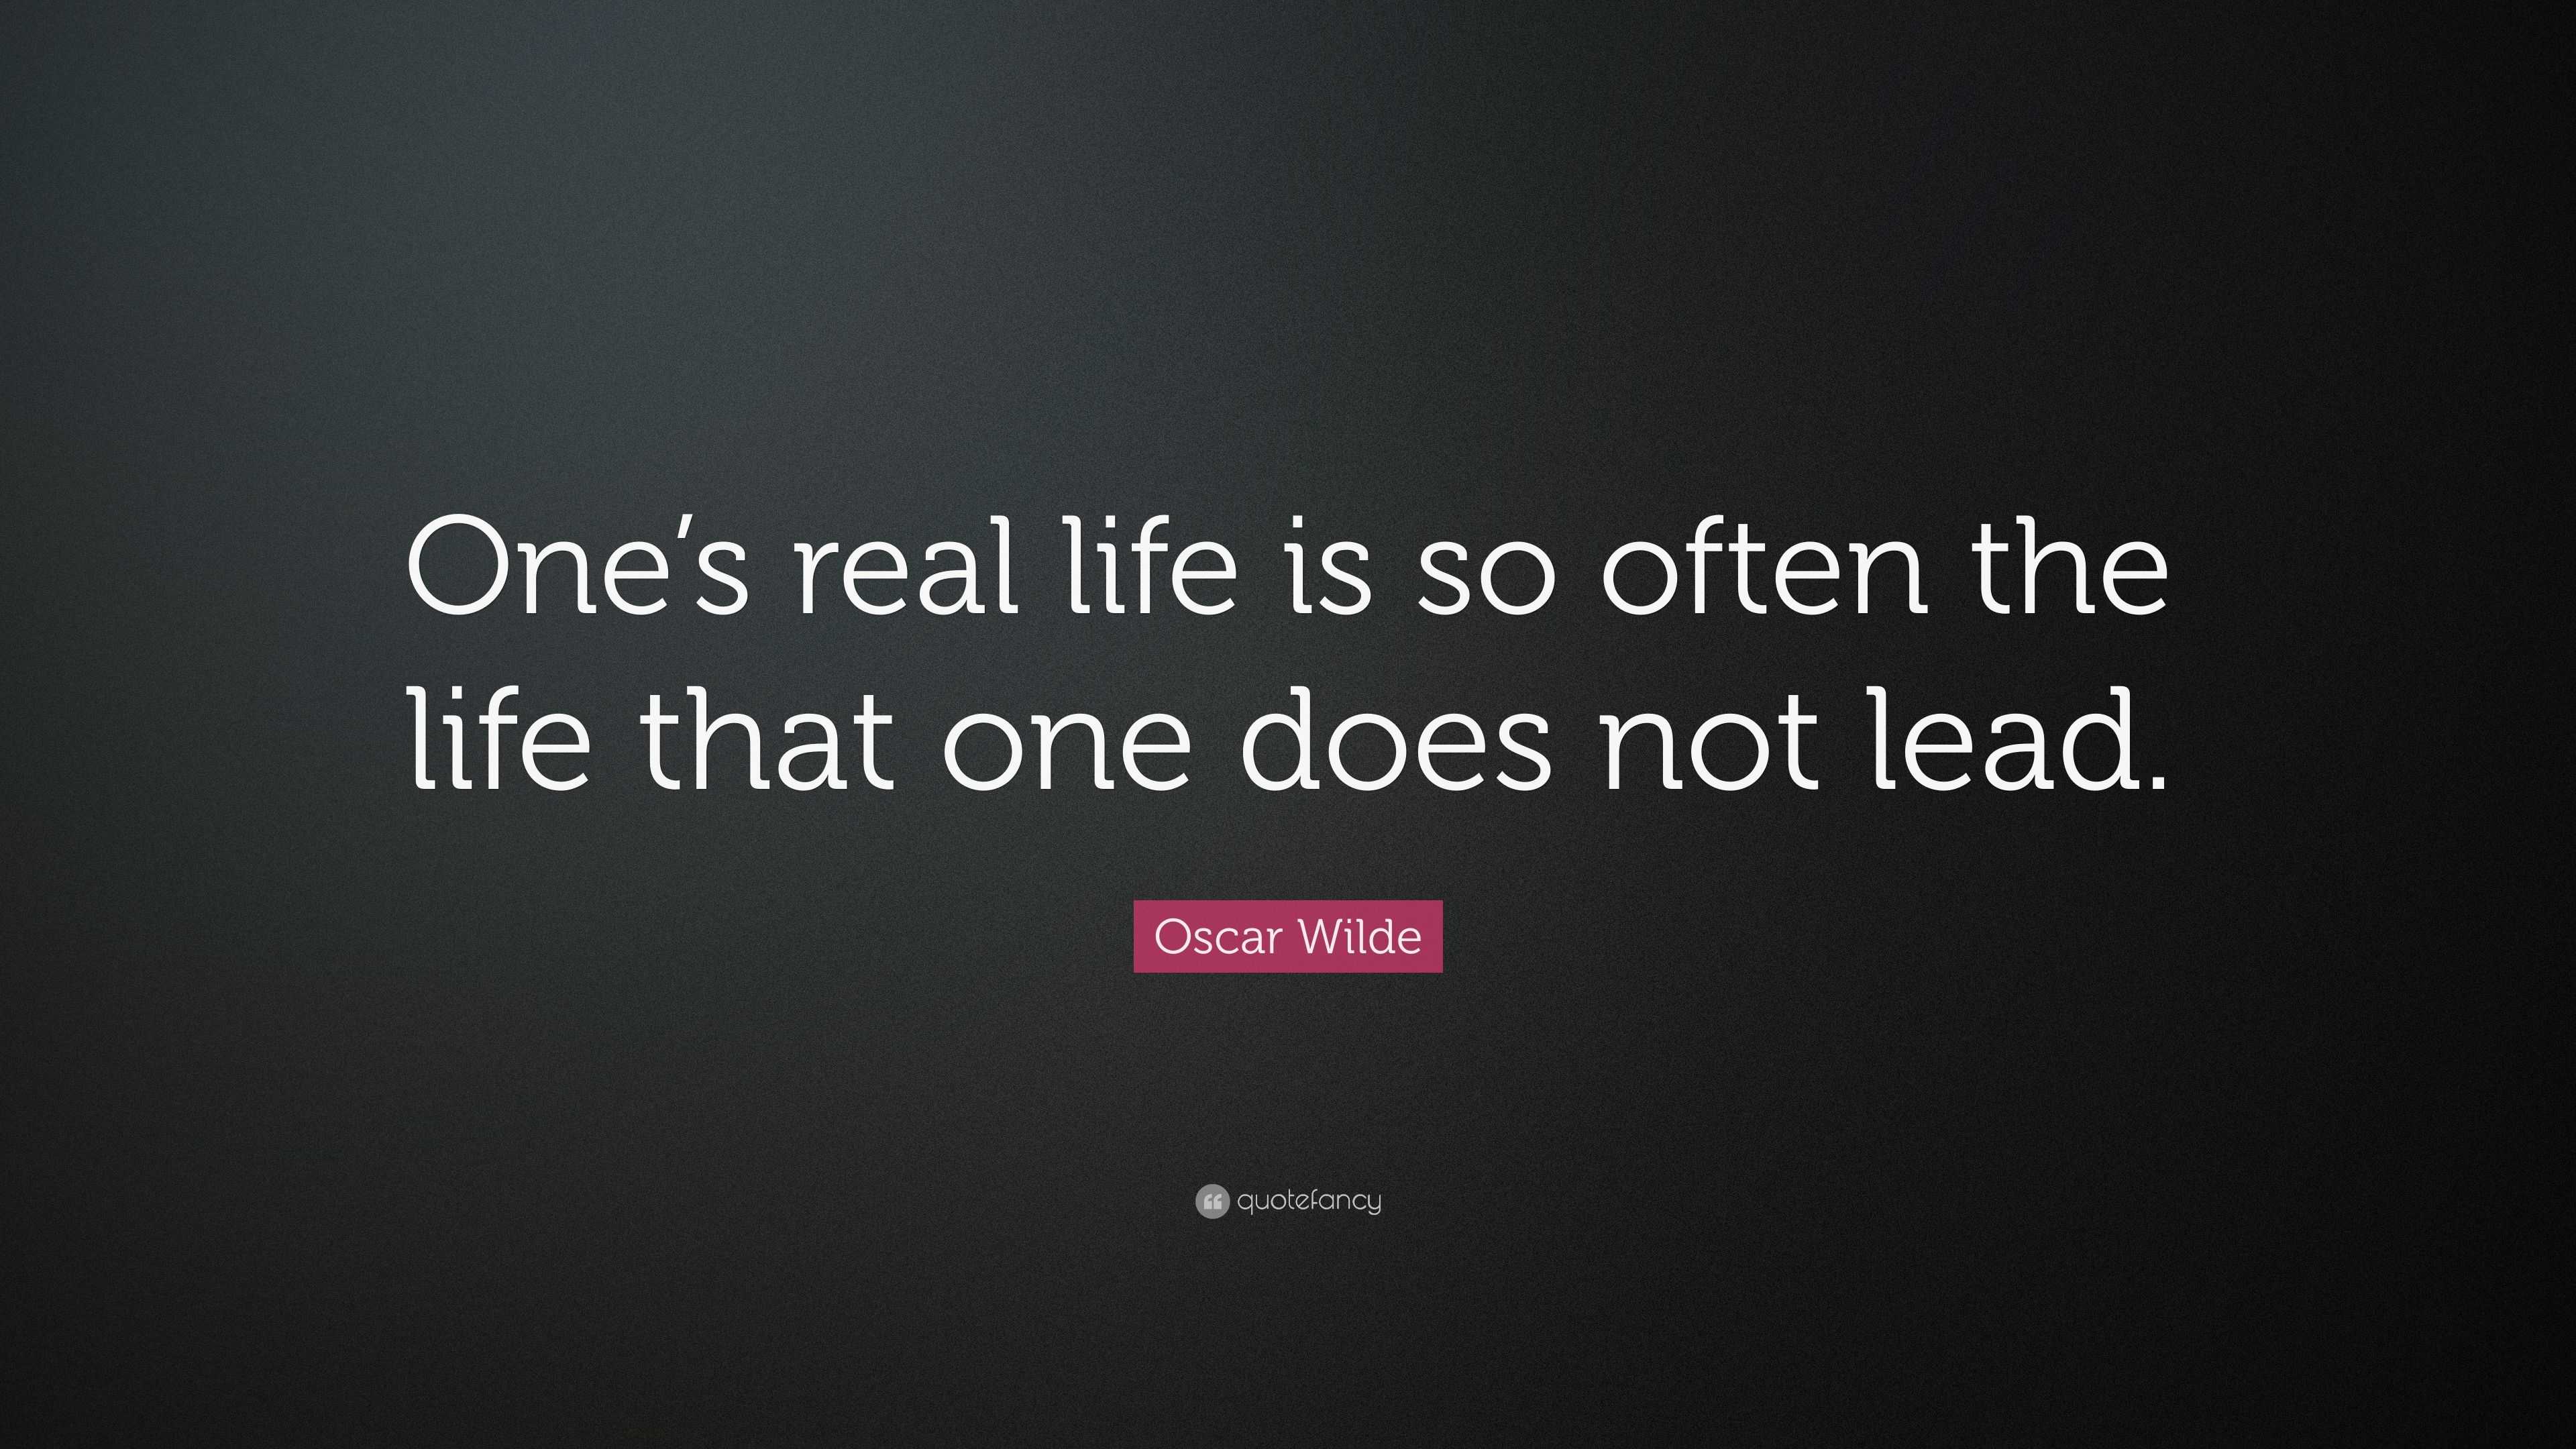 Oscar Wilde Quote “ e s real life is so often the life that one does